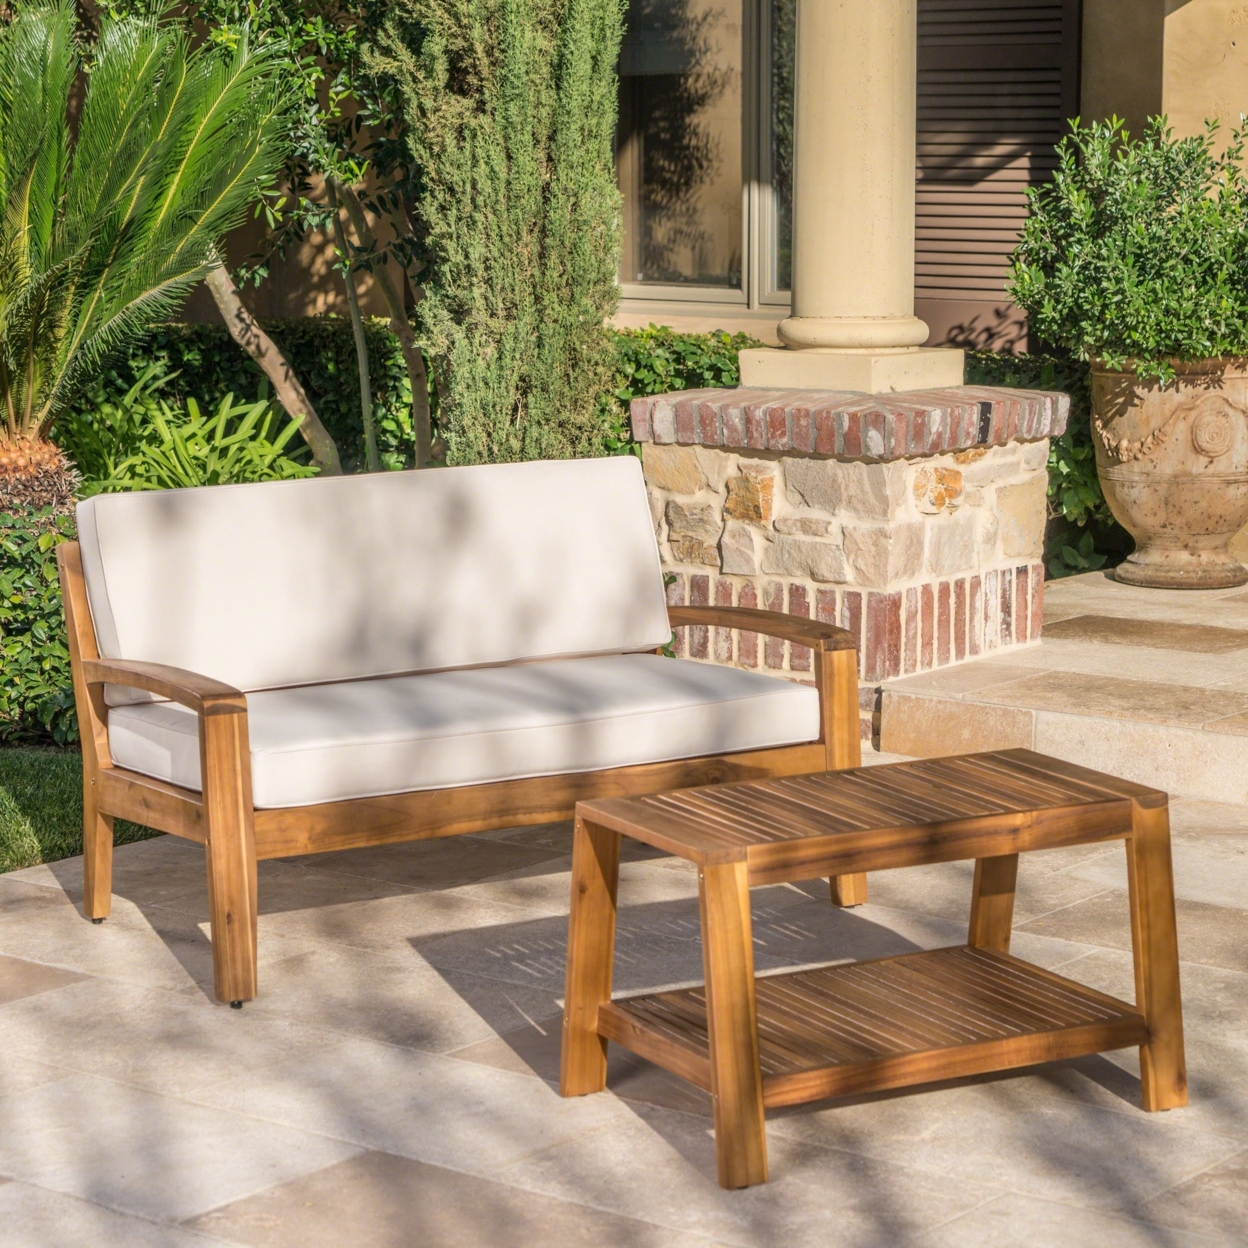 Christian Outdoor Acacia Wood Loveseat And Coffee Table Set With Cushions - Teak Finish/red